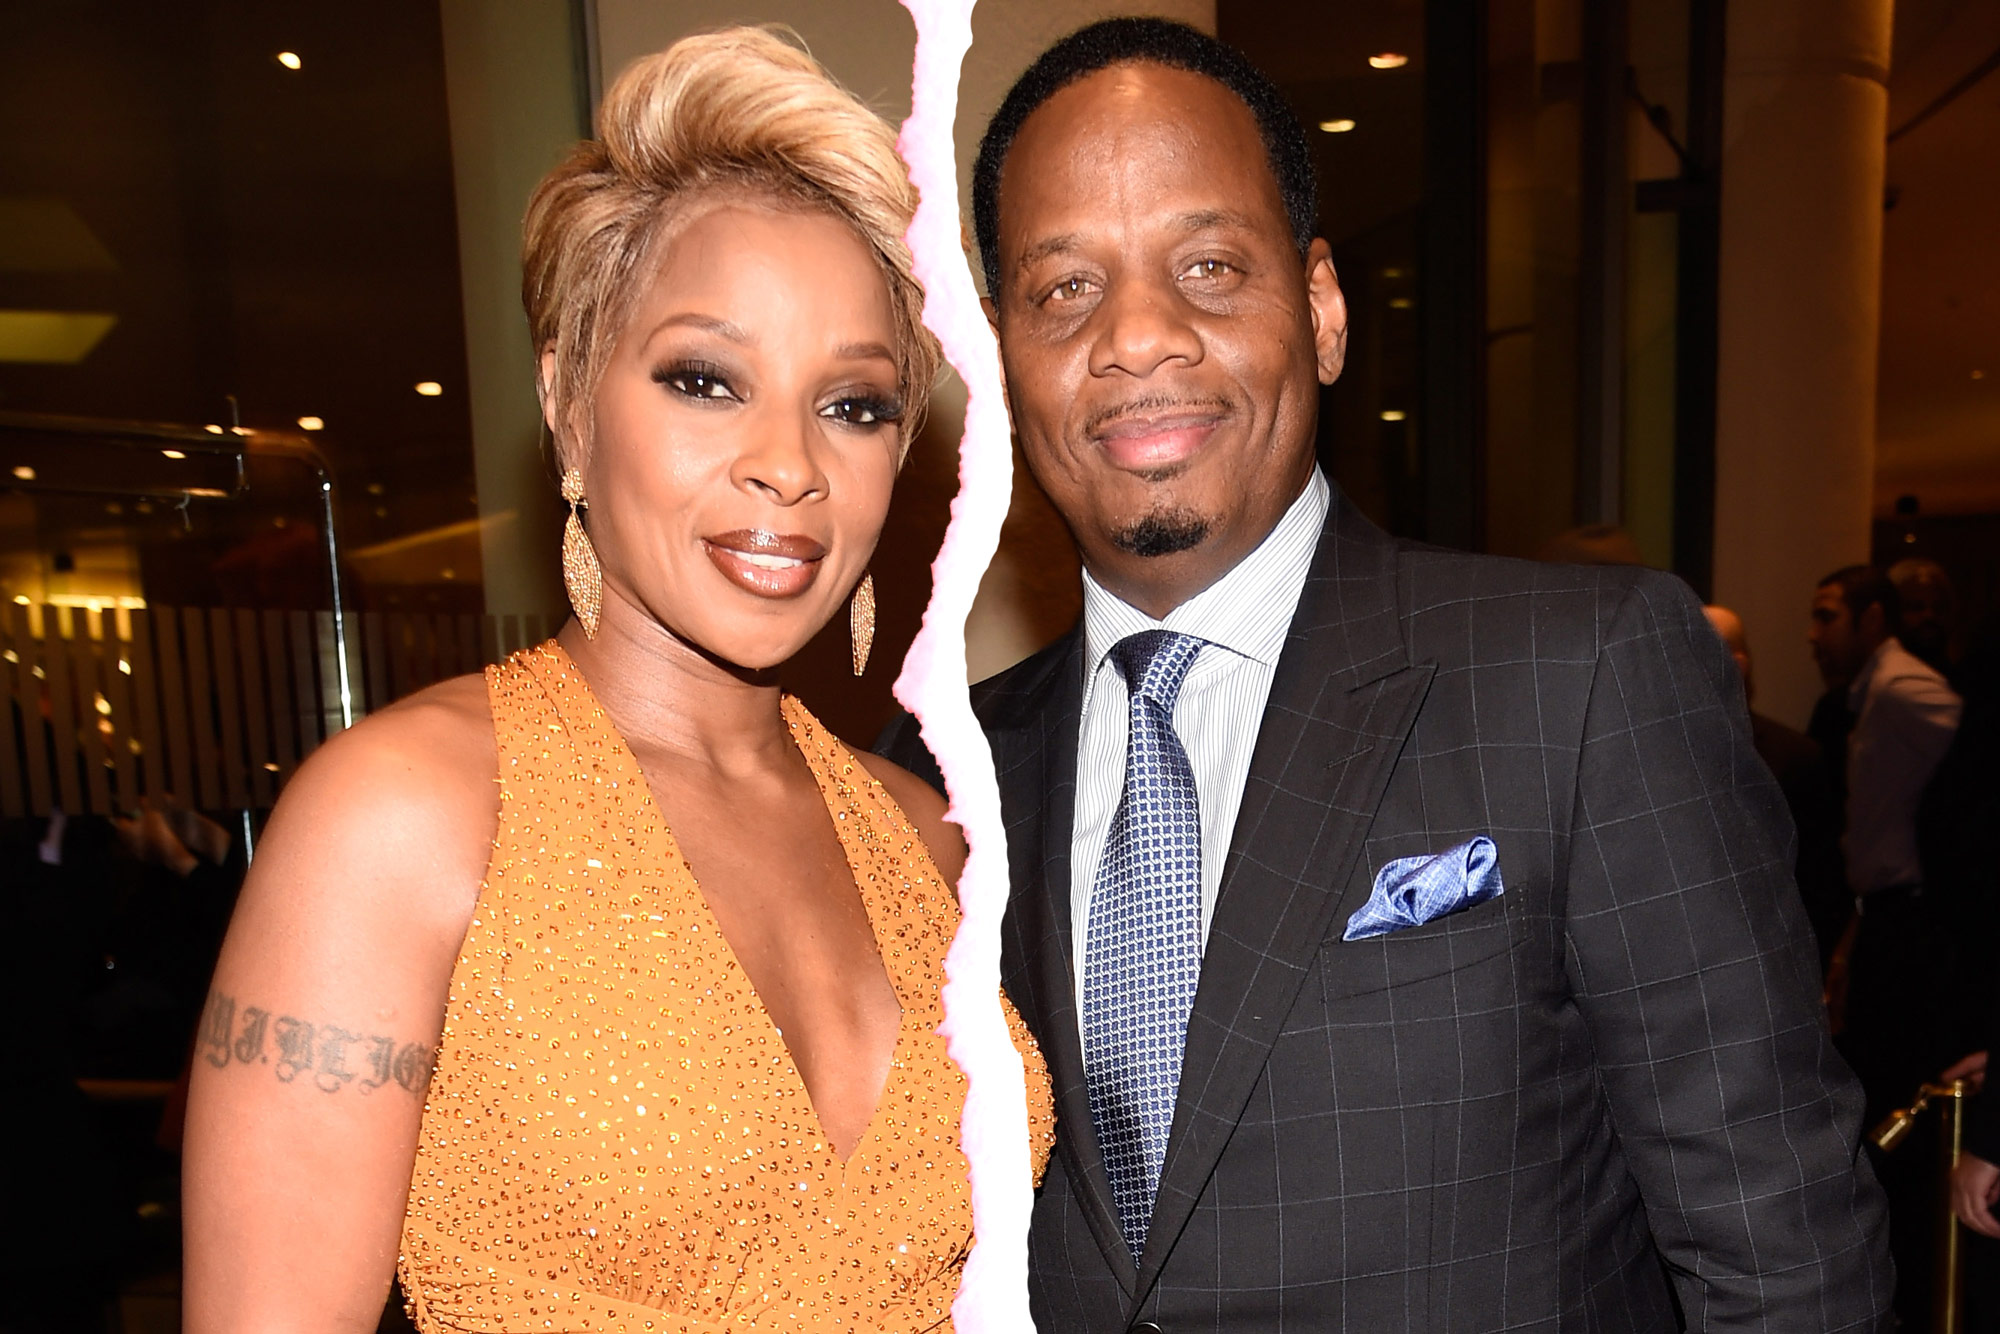 Mary J. Blige and her husband/manager are divorcing Page Six